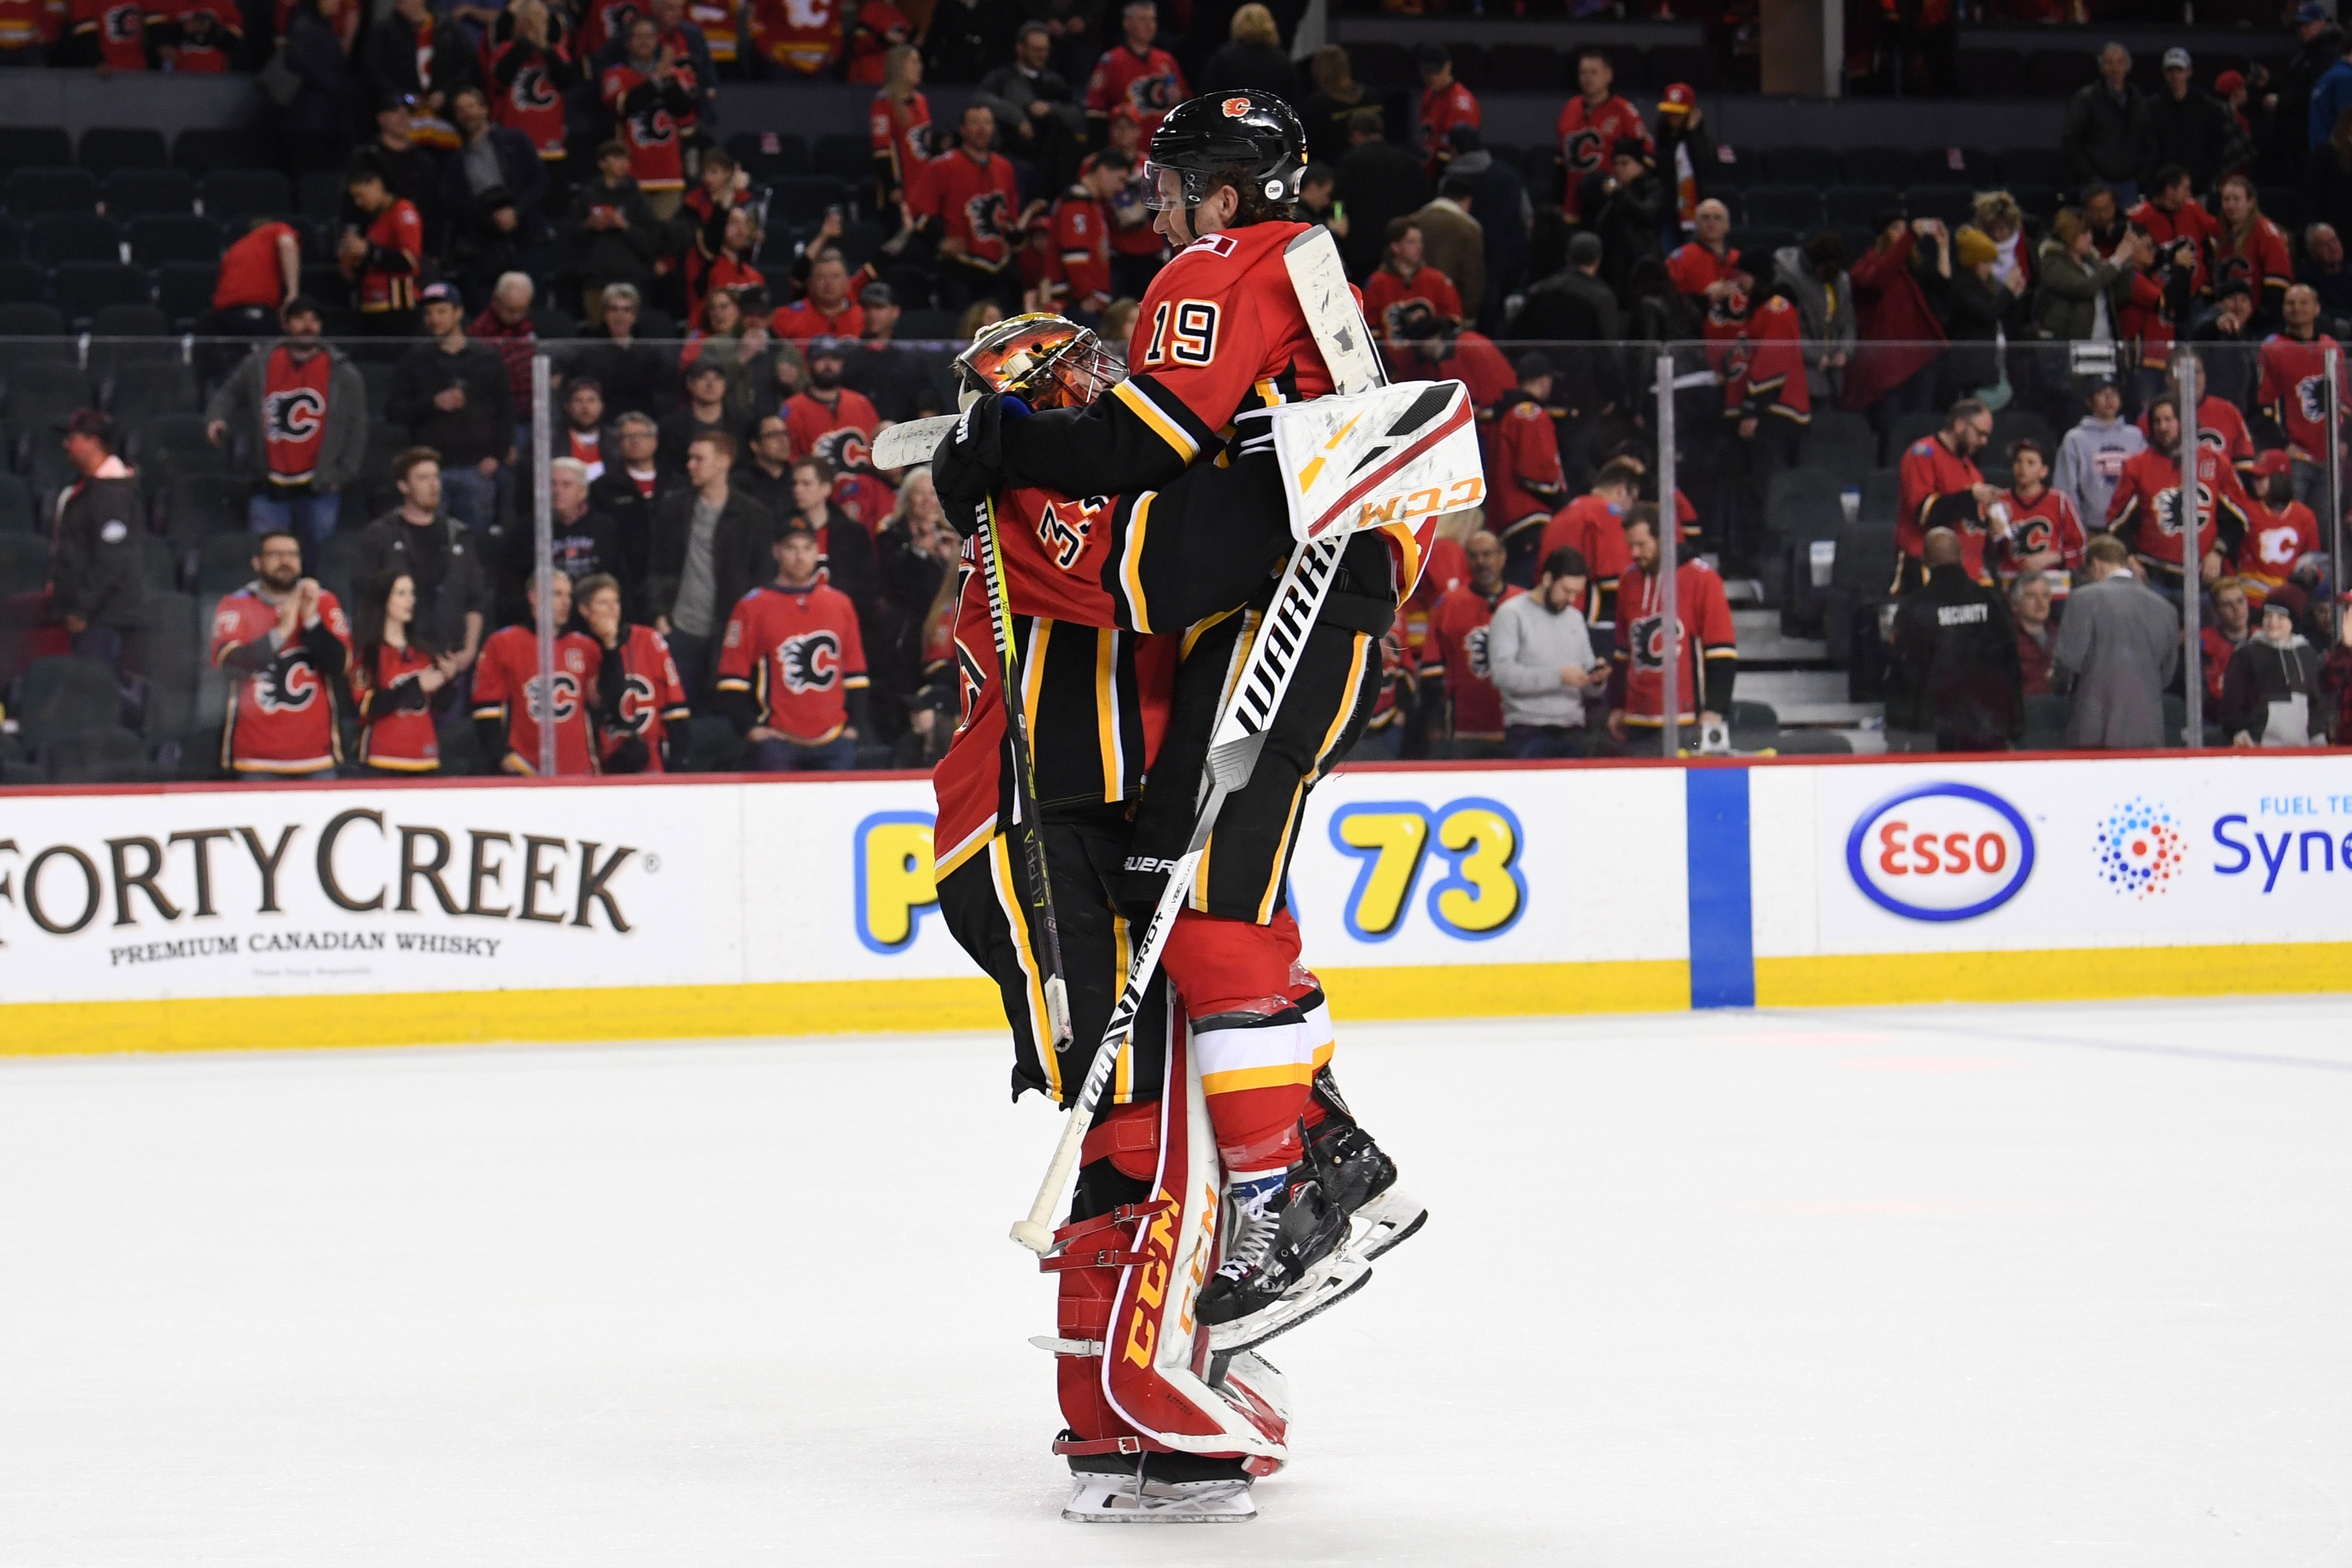 Mar 10, 2019; Calgary, Alberta, CAN; Calgary Flames goalie David Rittich (33) and left wing Matthew Tkachuk (19) celebrate the win over the Las Vegas Golden Knights at Scotiabank Saddledome. Flames won 6-3.&nbsp;